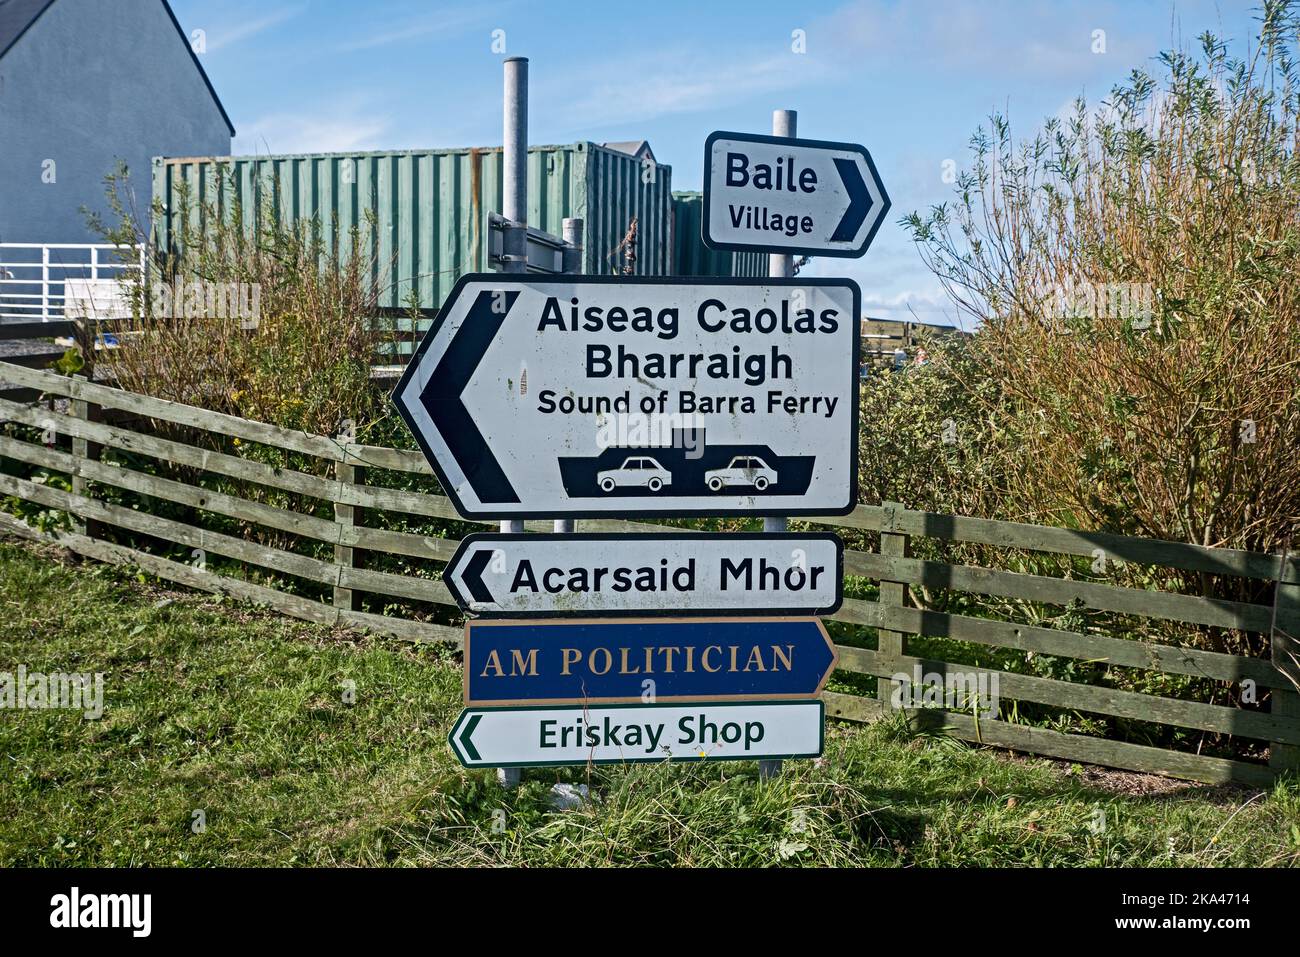 Signs in Gaelic and English on Eriskay in the Outer Hebrides, Scotland, UK. Stock Photo